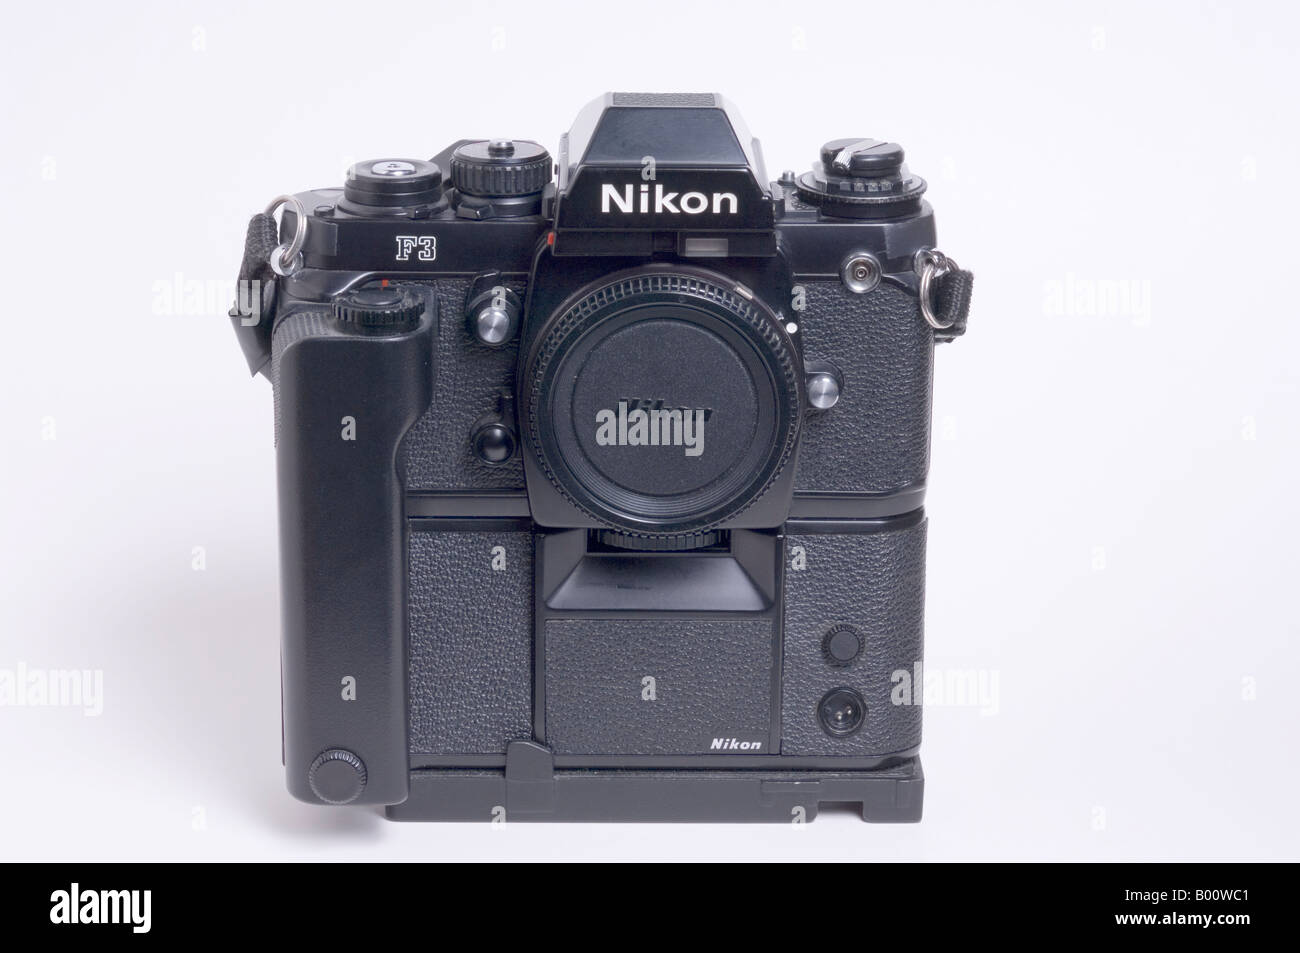 Nikon F3 professional 35mm film camera from the 1980's And MD4 Motordrive  Stock Photo - Alamy